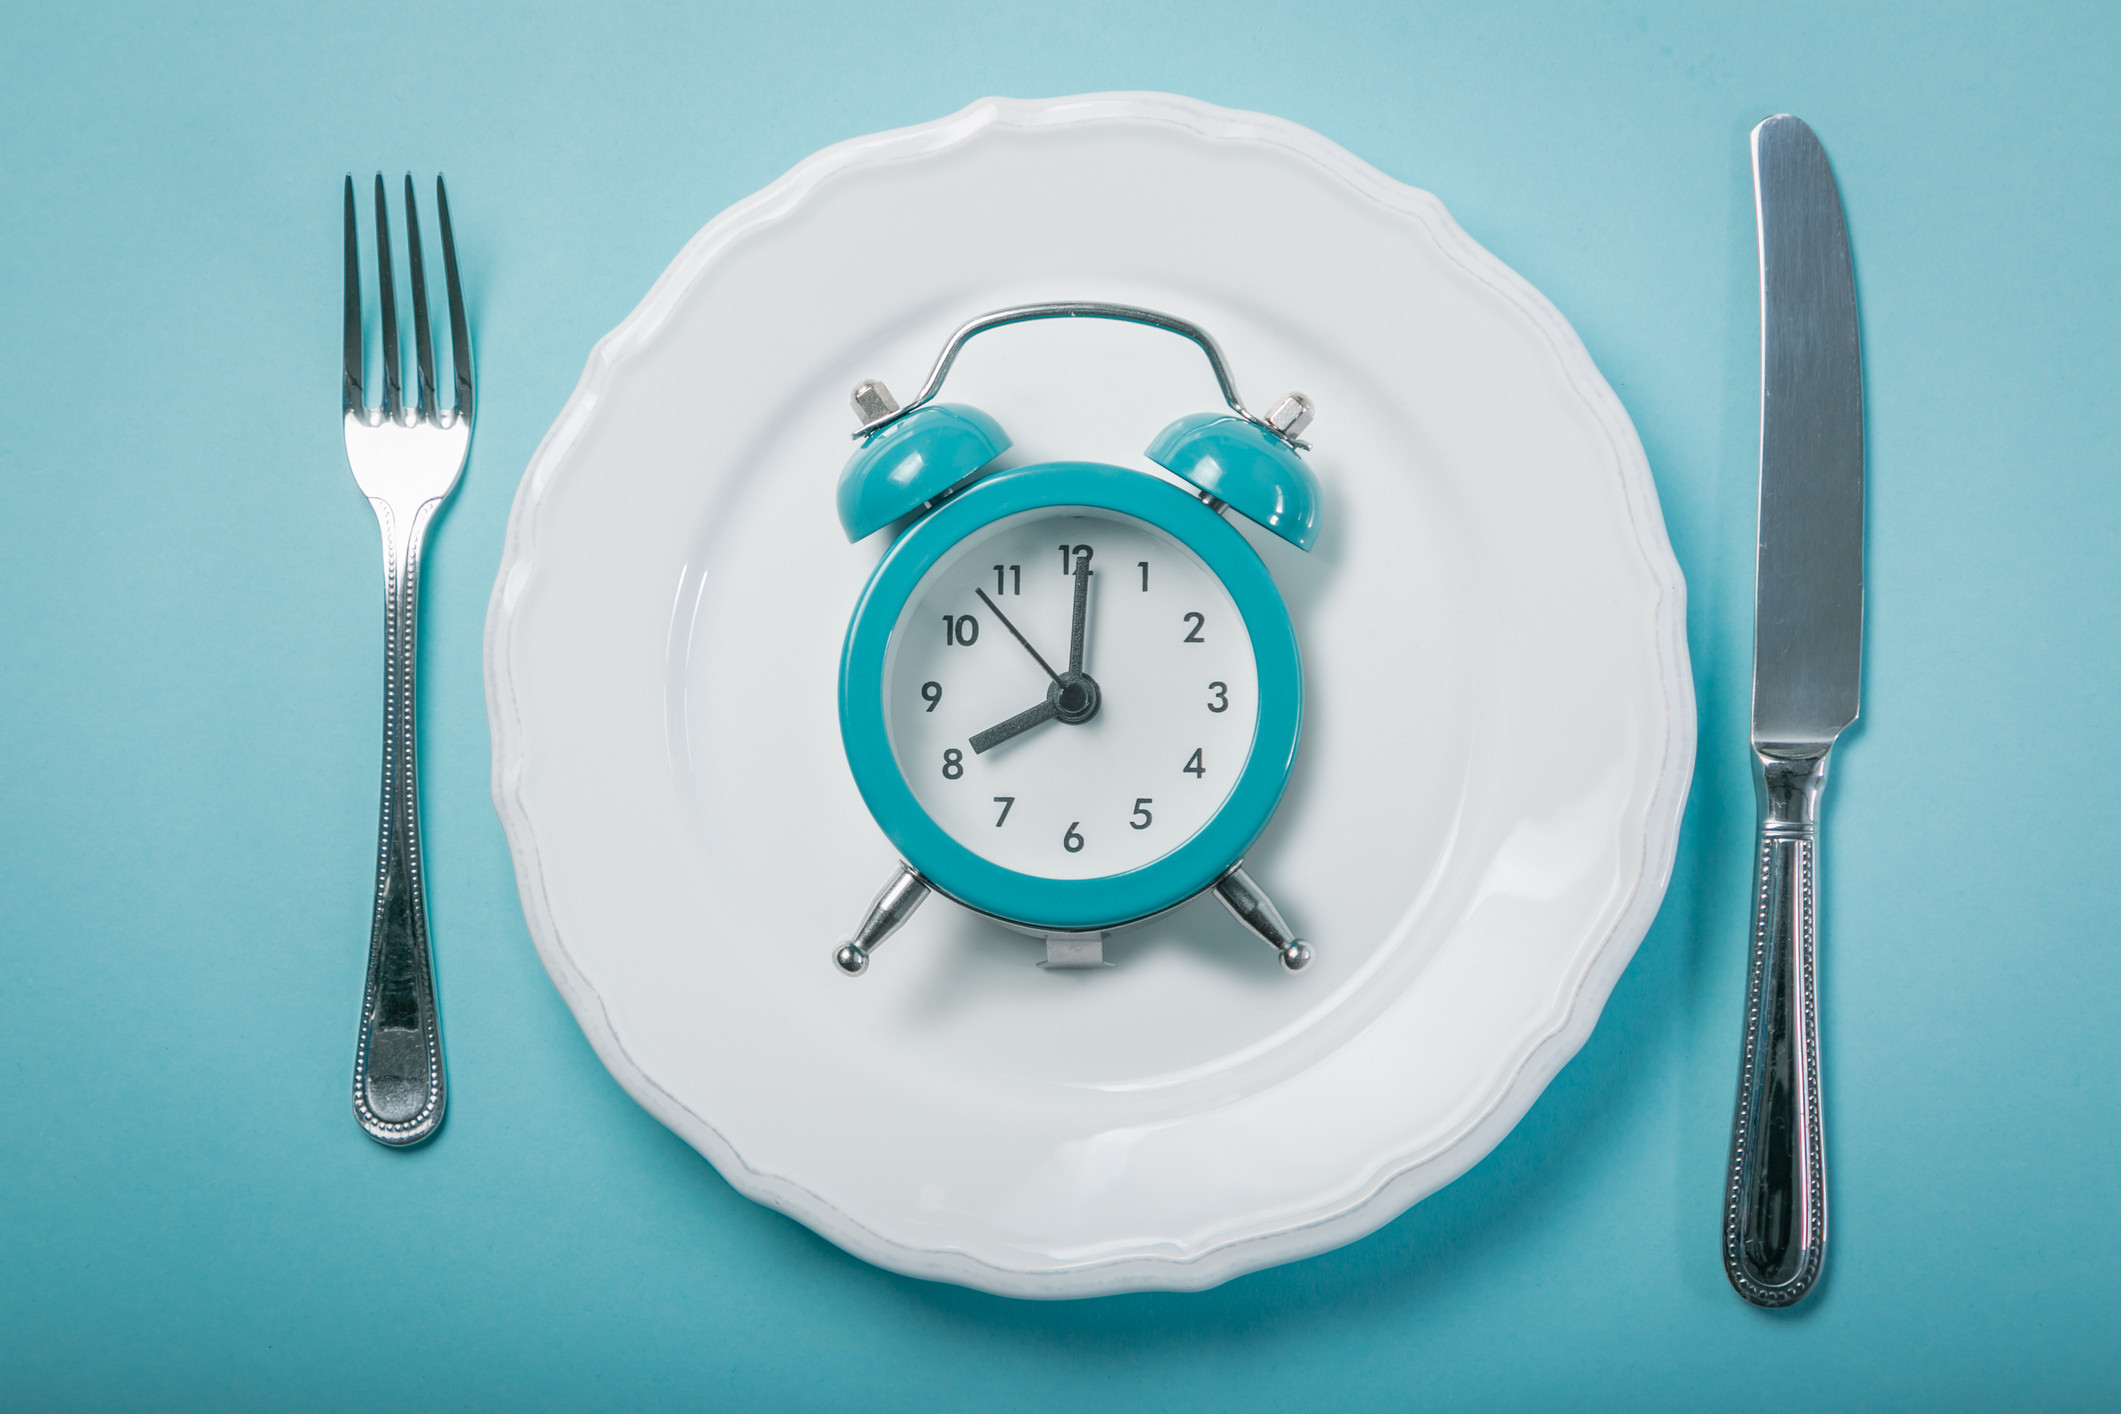 Fasting to Delay Age-Related Issues